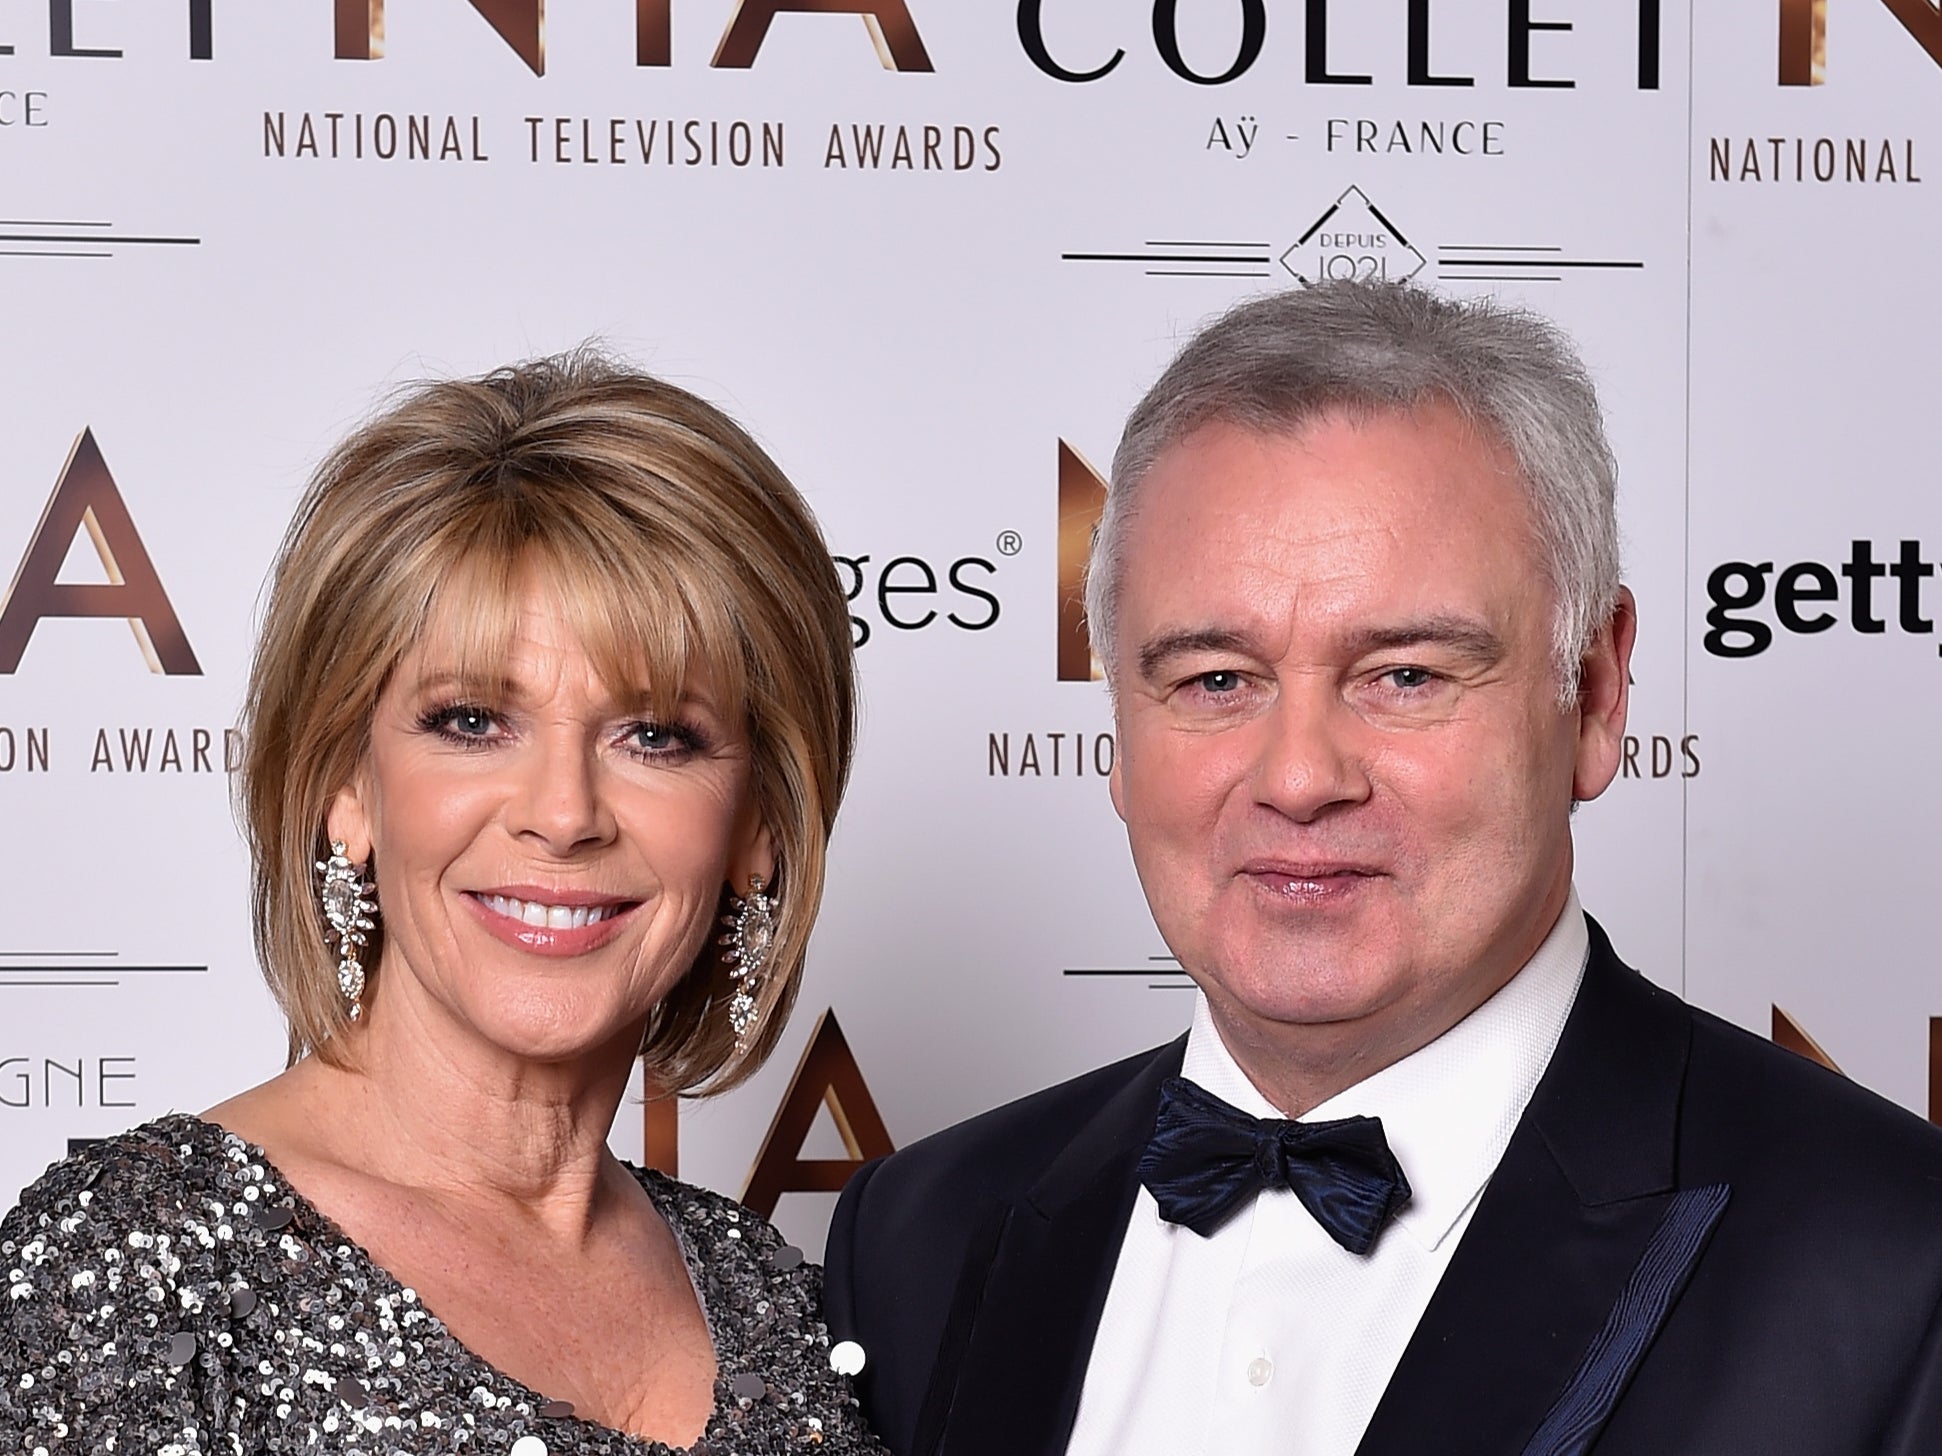 It’s been claimed Holmes and Langsford’s relationship breakdown is due to work commitments taking their marriage ‘in different directions’